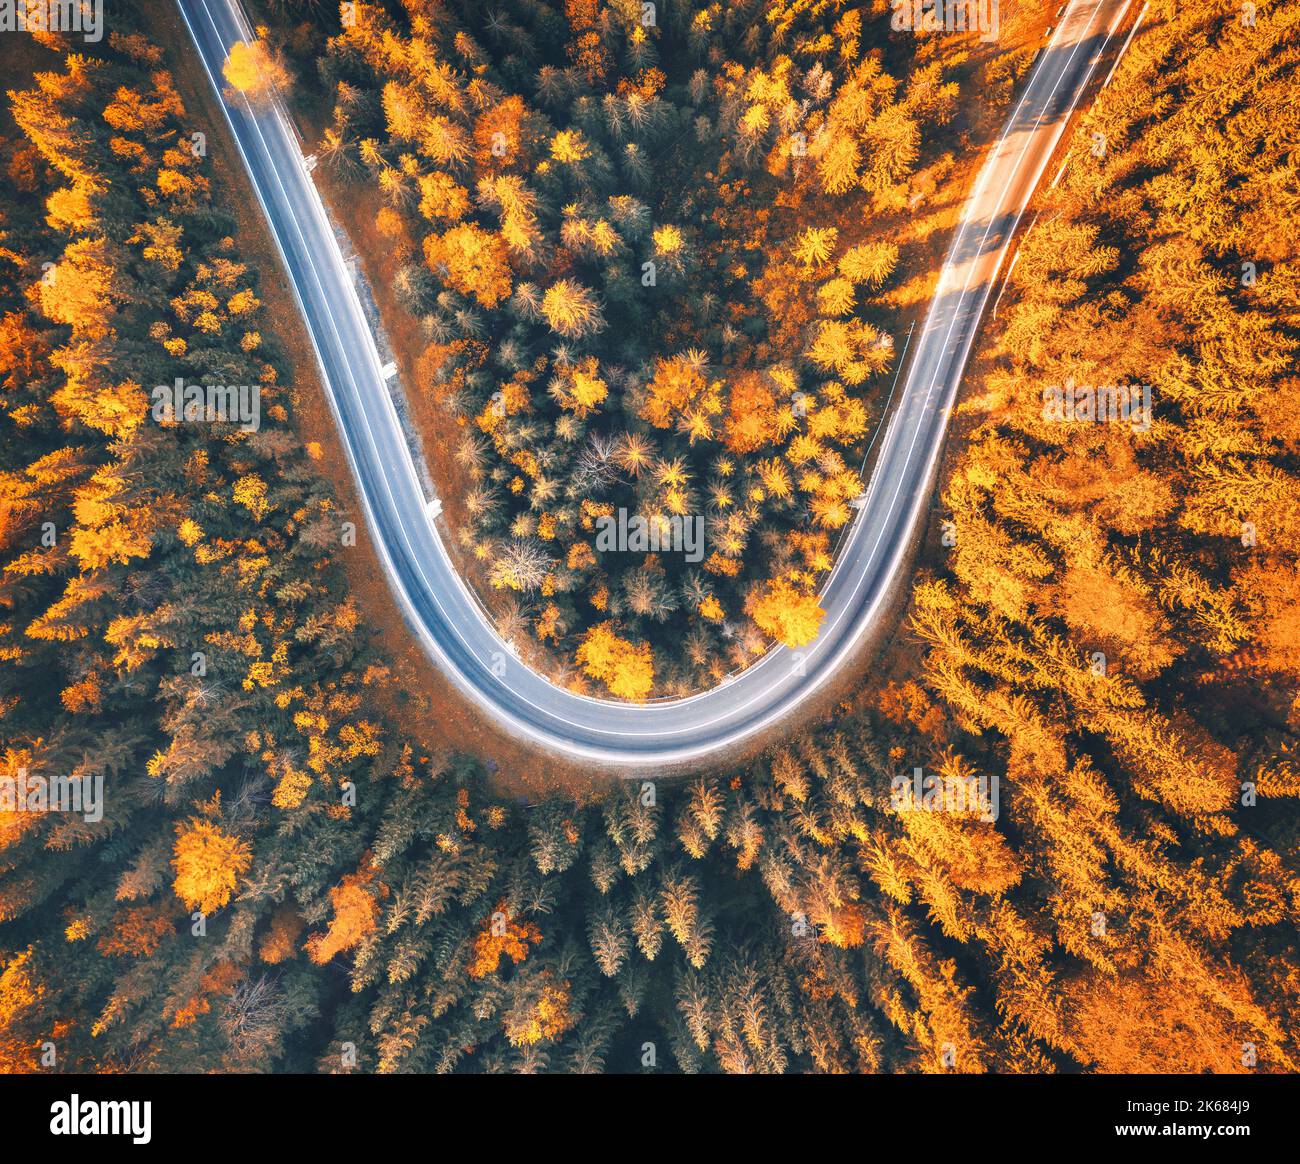 Aerial view of winding road with car in colorful autumn forest Stock Photo